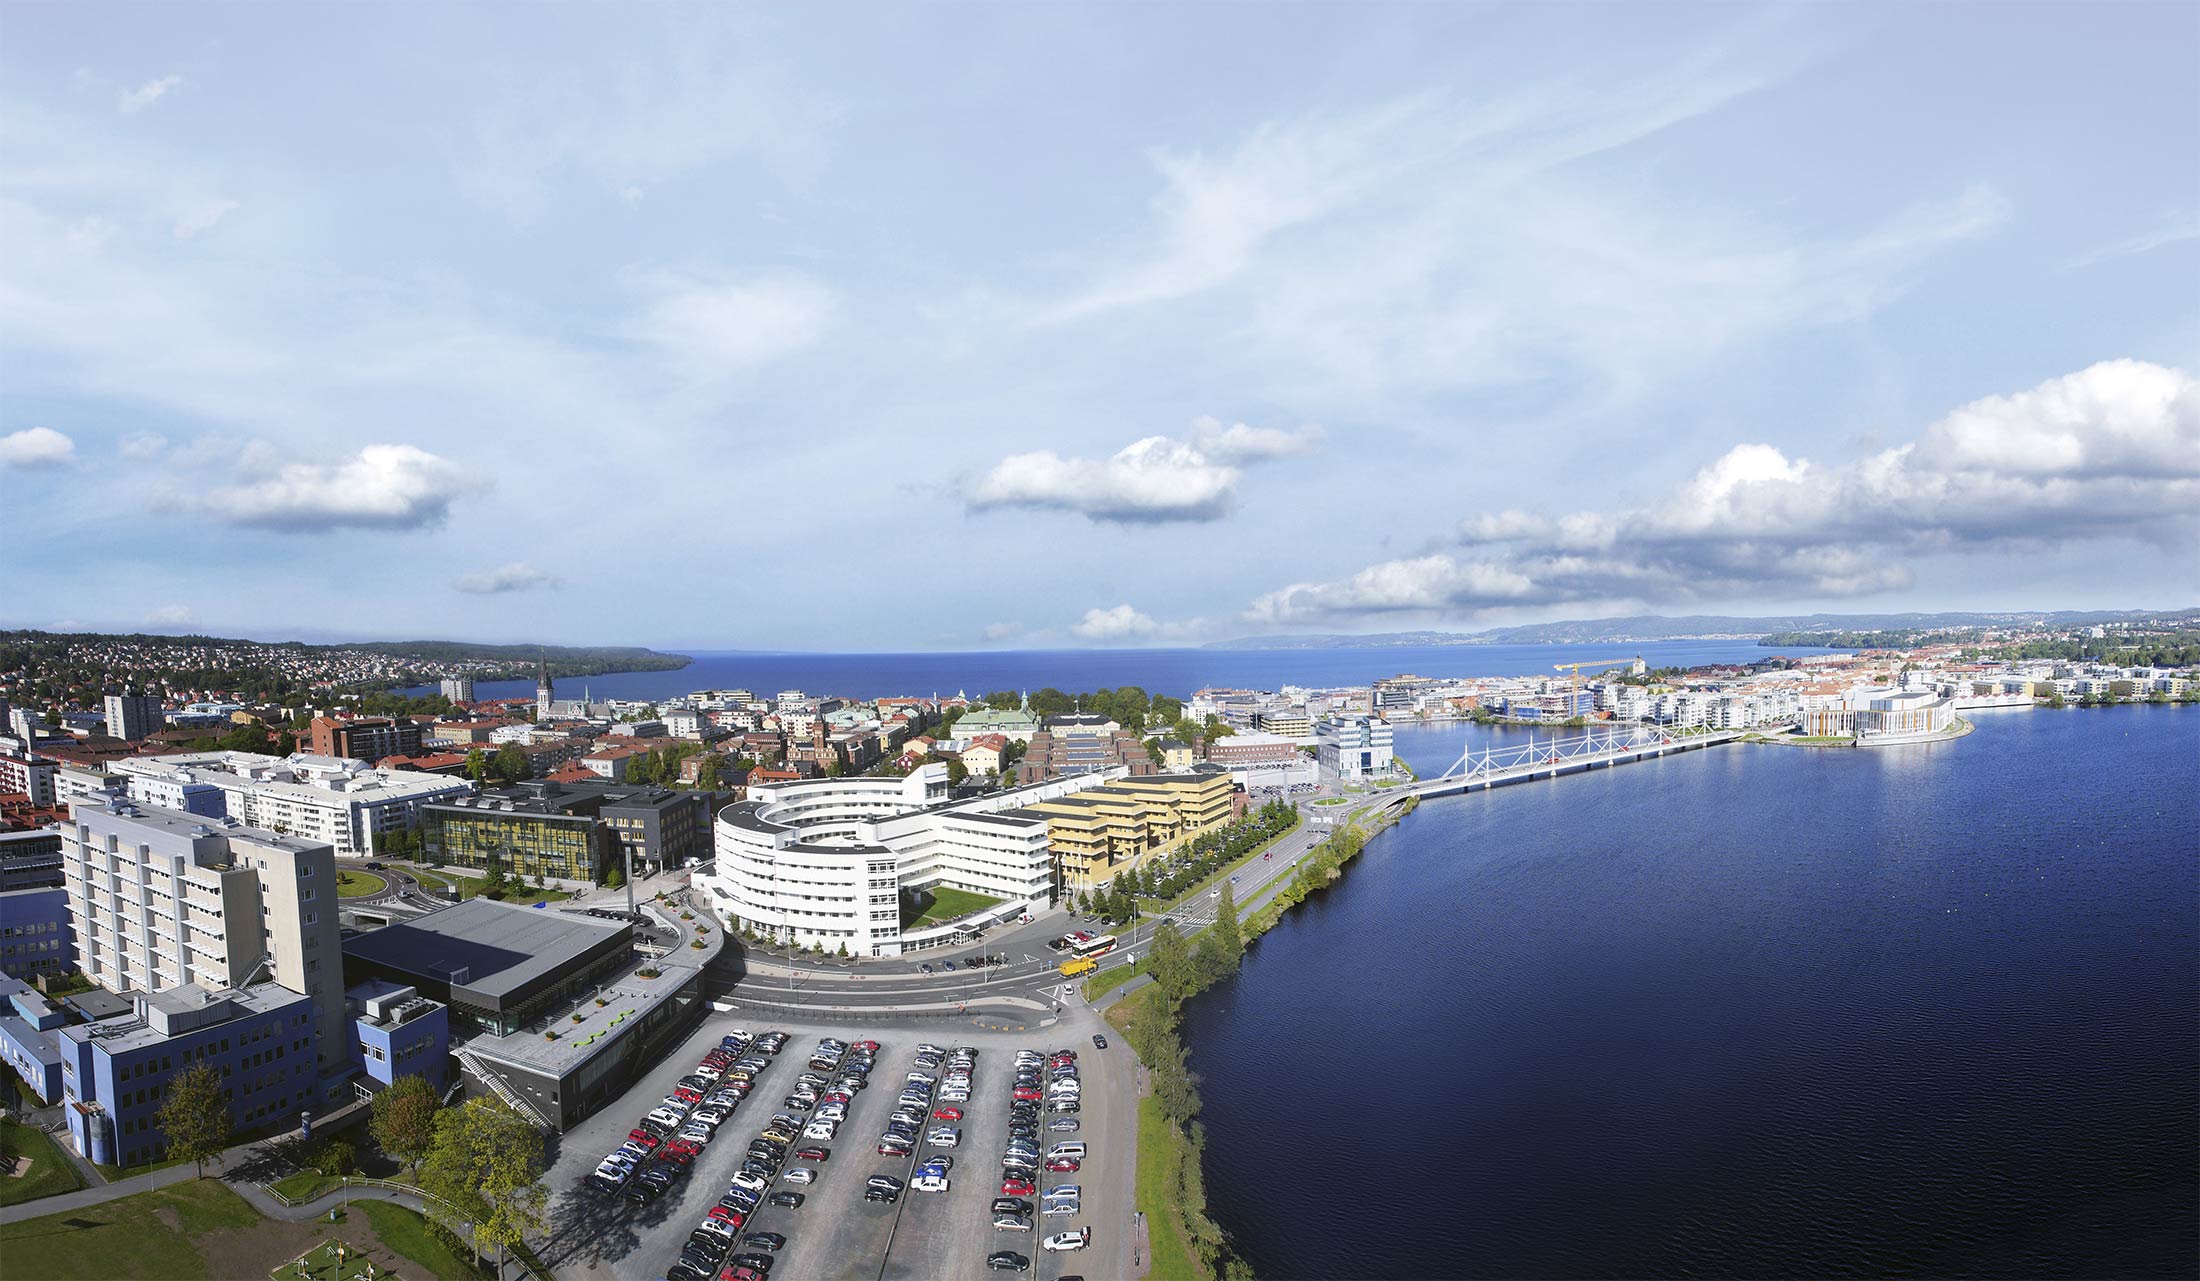 Jönköping University campus, in the middle of the beautiful city of Jönköping, situated by lake Vättern in the southern part of Sweden.